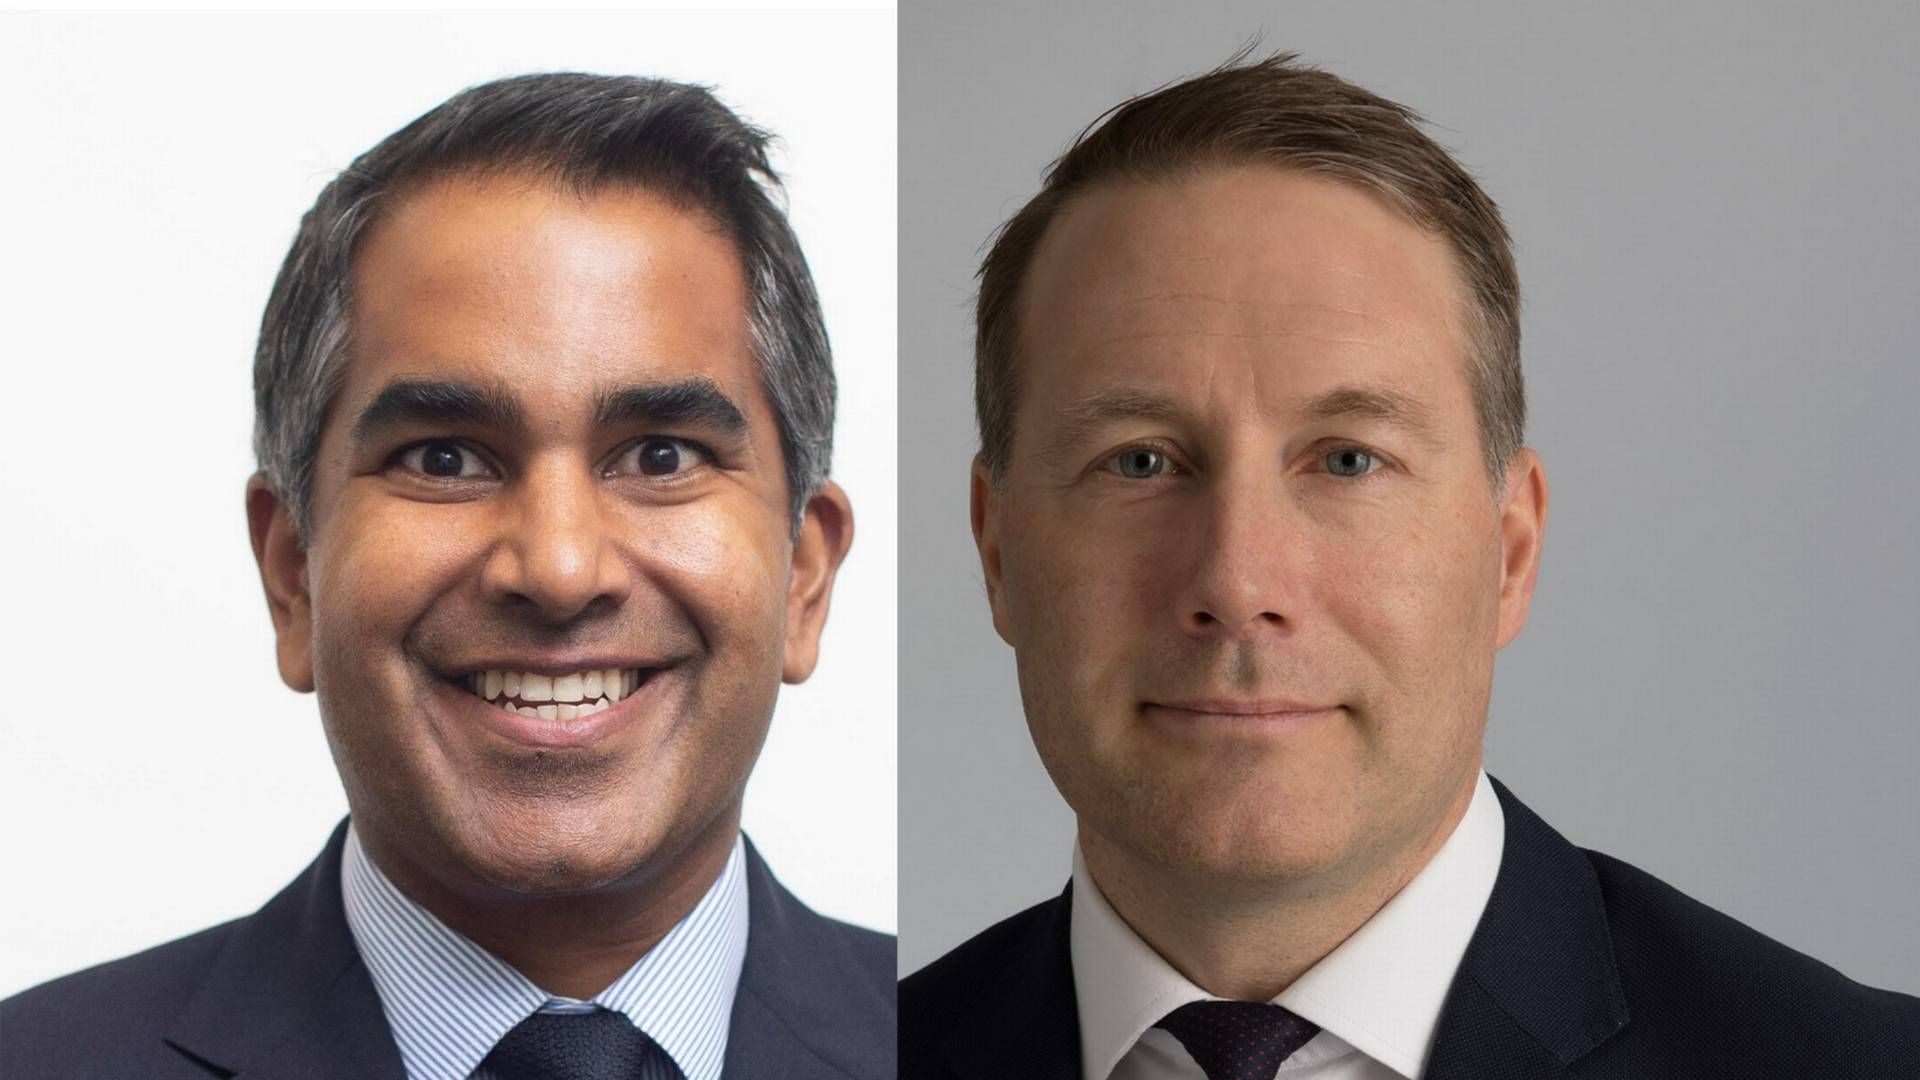 Stefan Behring Head of Nordics at Invesco (right) and senior client portfolio manager of Invesco’s private credit platform, Raman Rajagopal. | Photo: PR/Invesco